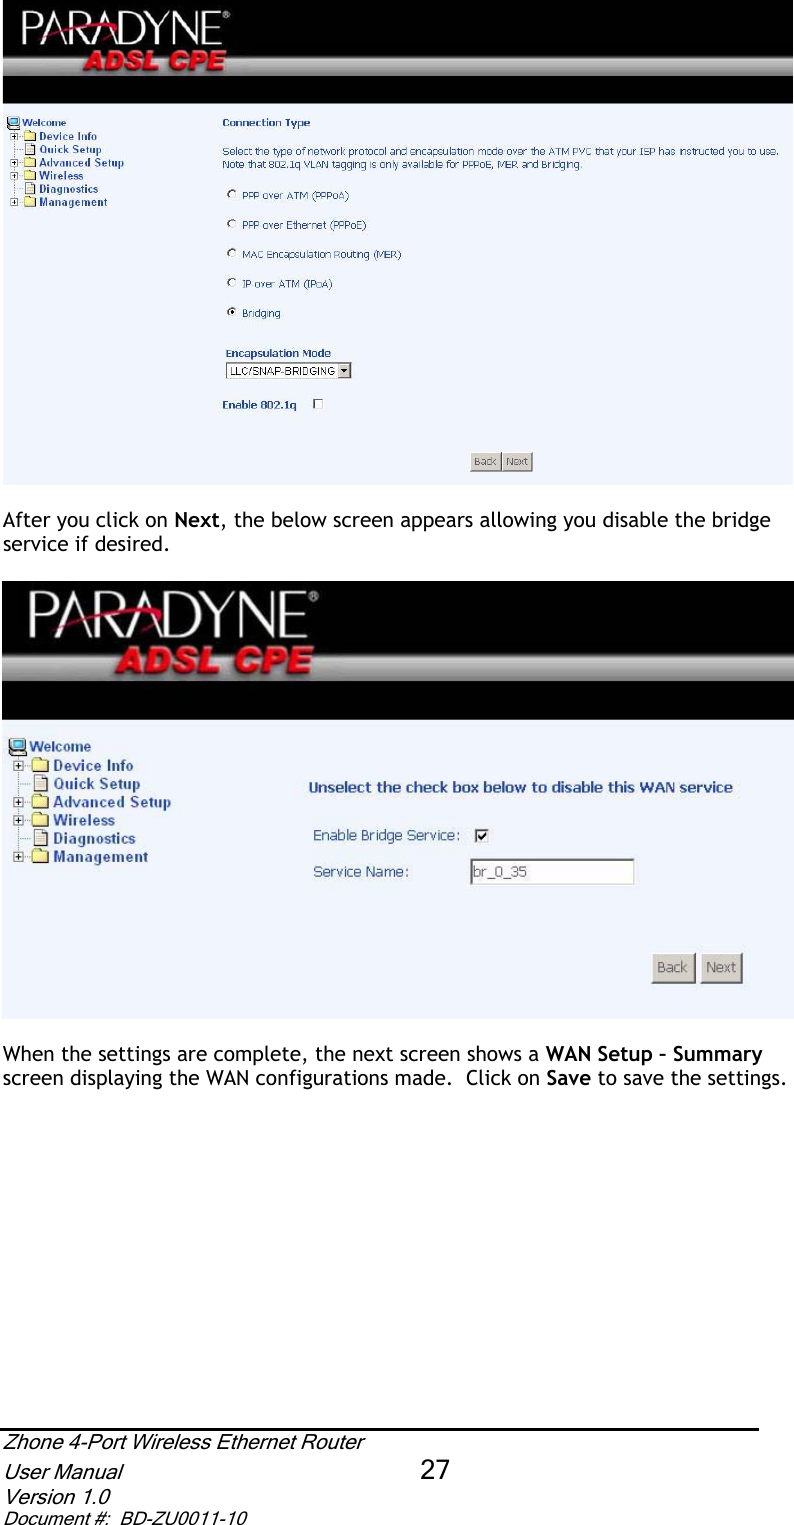 After you click on Next, the below screen appears allowing you disable the bridge service if desired. When the settings are complete, the next screen shows a WAN Setup – Summary screen displaying the WAN configurations made.  Click on Save to save the settings. Zhone 4-Port Wireless Ethernet Router User Manual 27Version 1.0 Document #:  BD-ZU0011-10